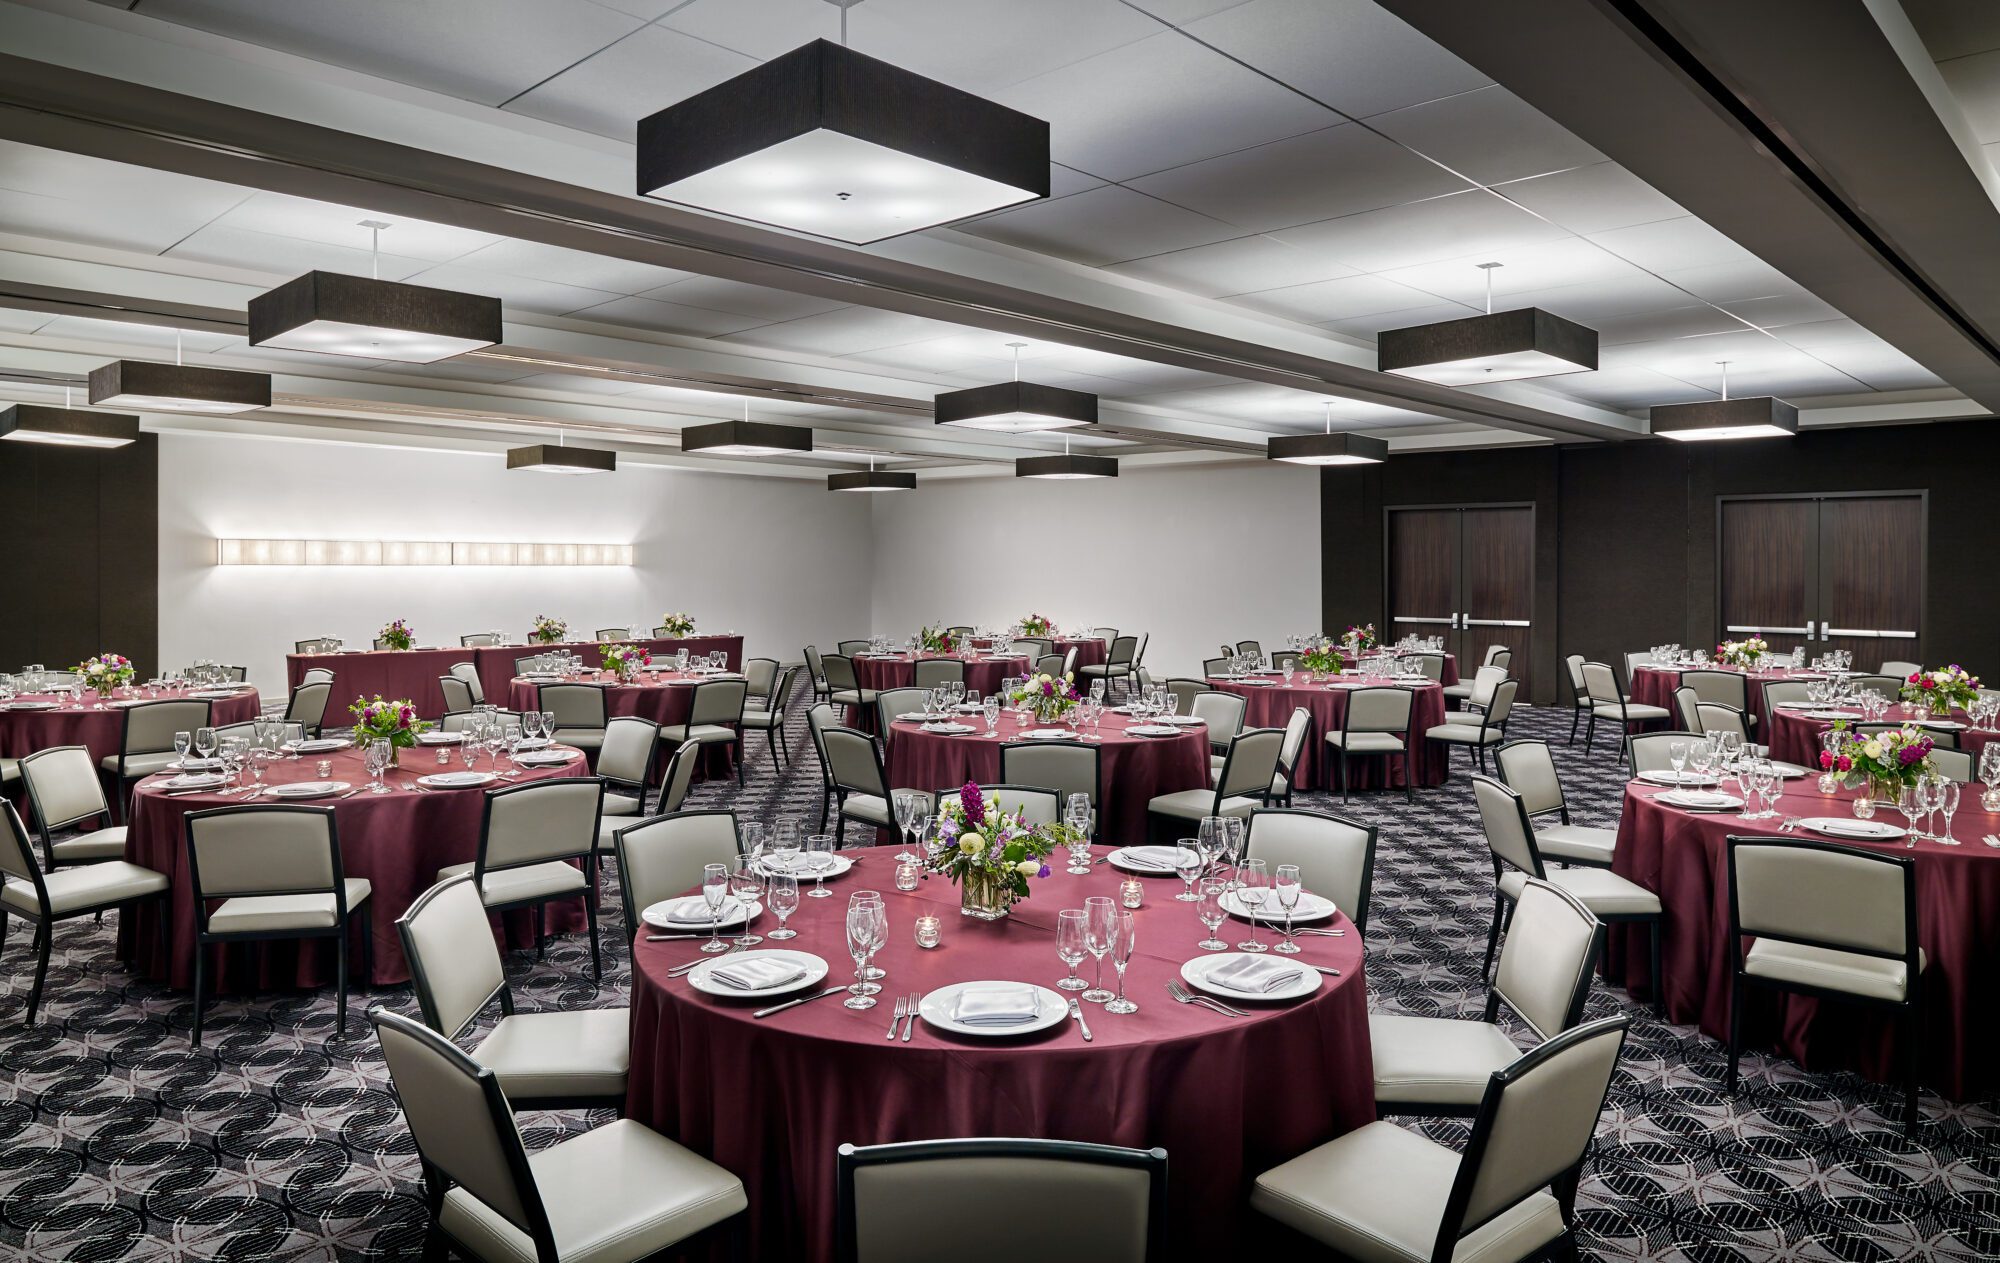 Ballroom at a downtown Chicago hotel set with round tables and maroon linens, dinner setting and florals on the tables